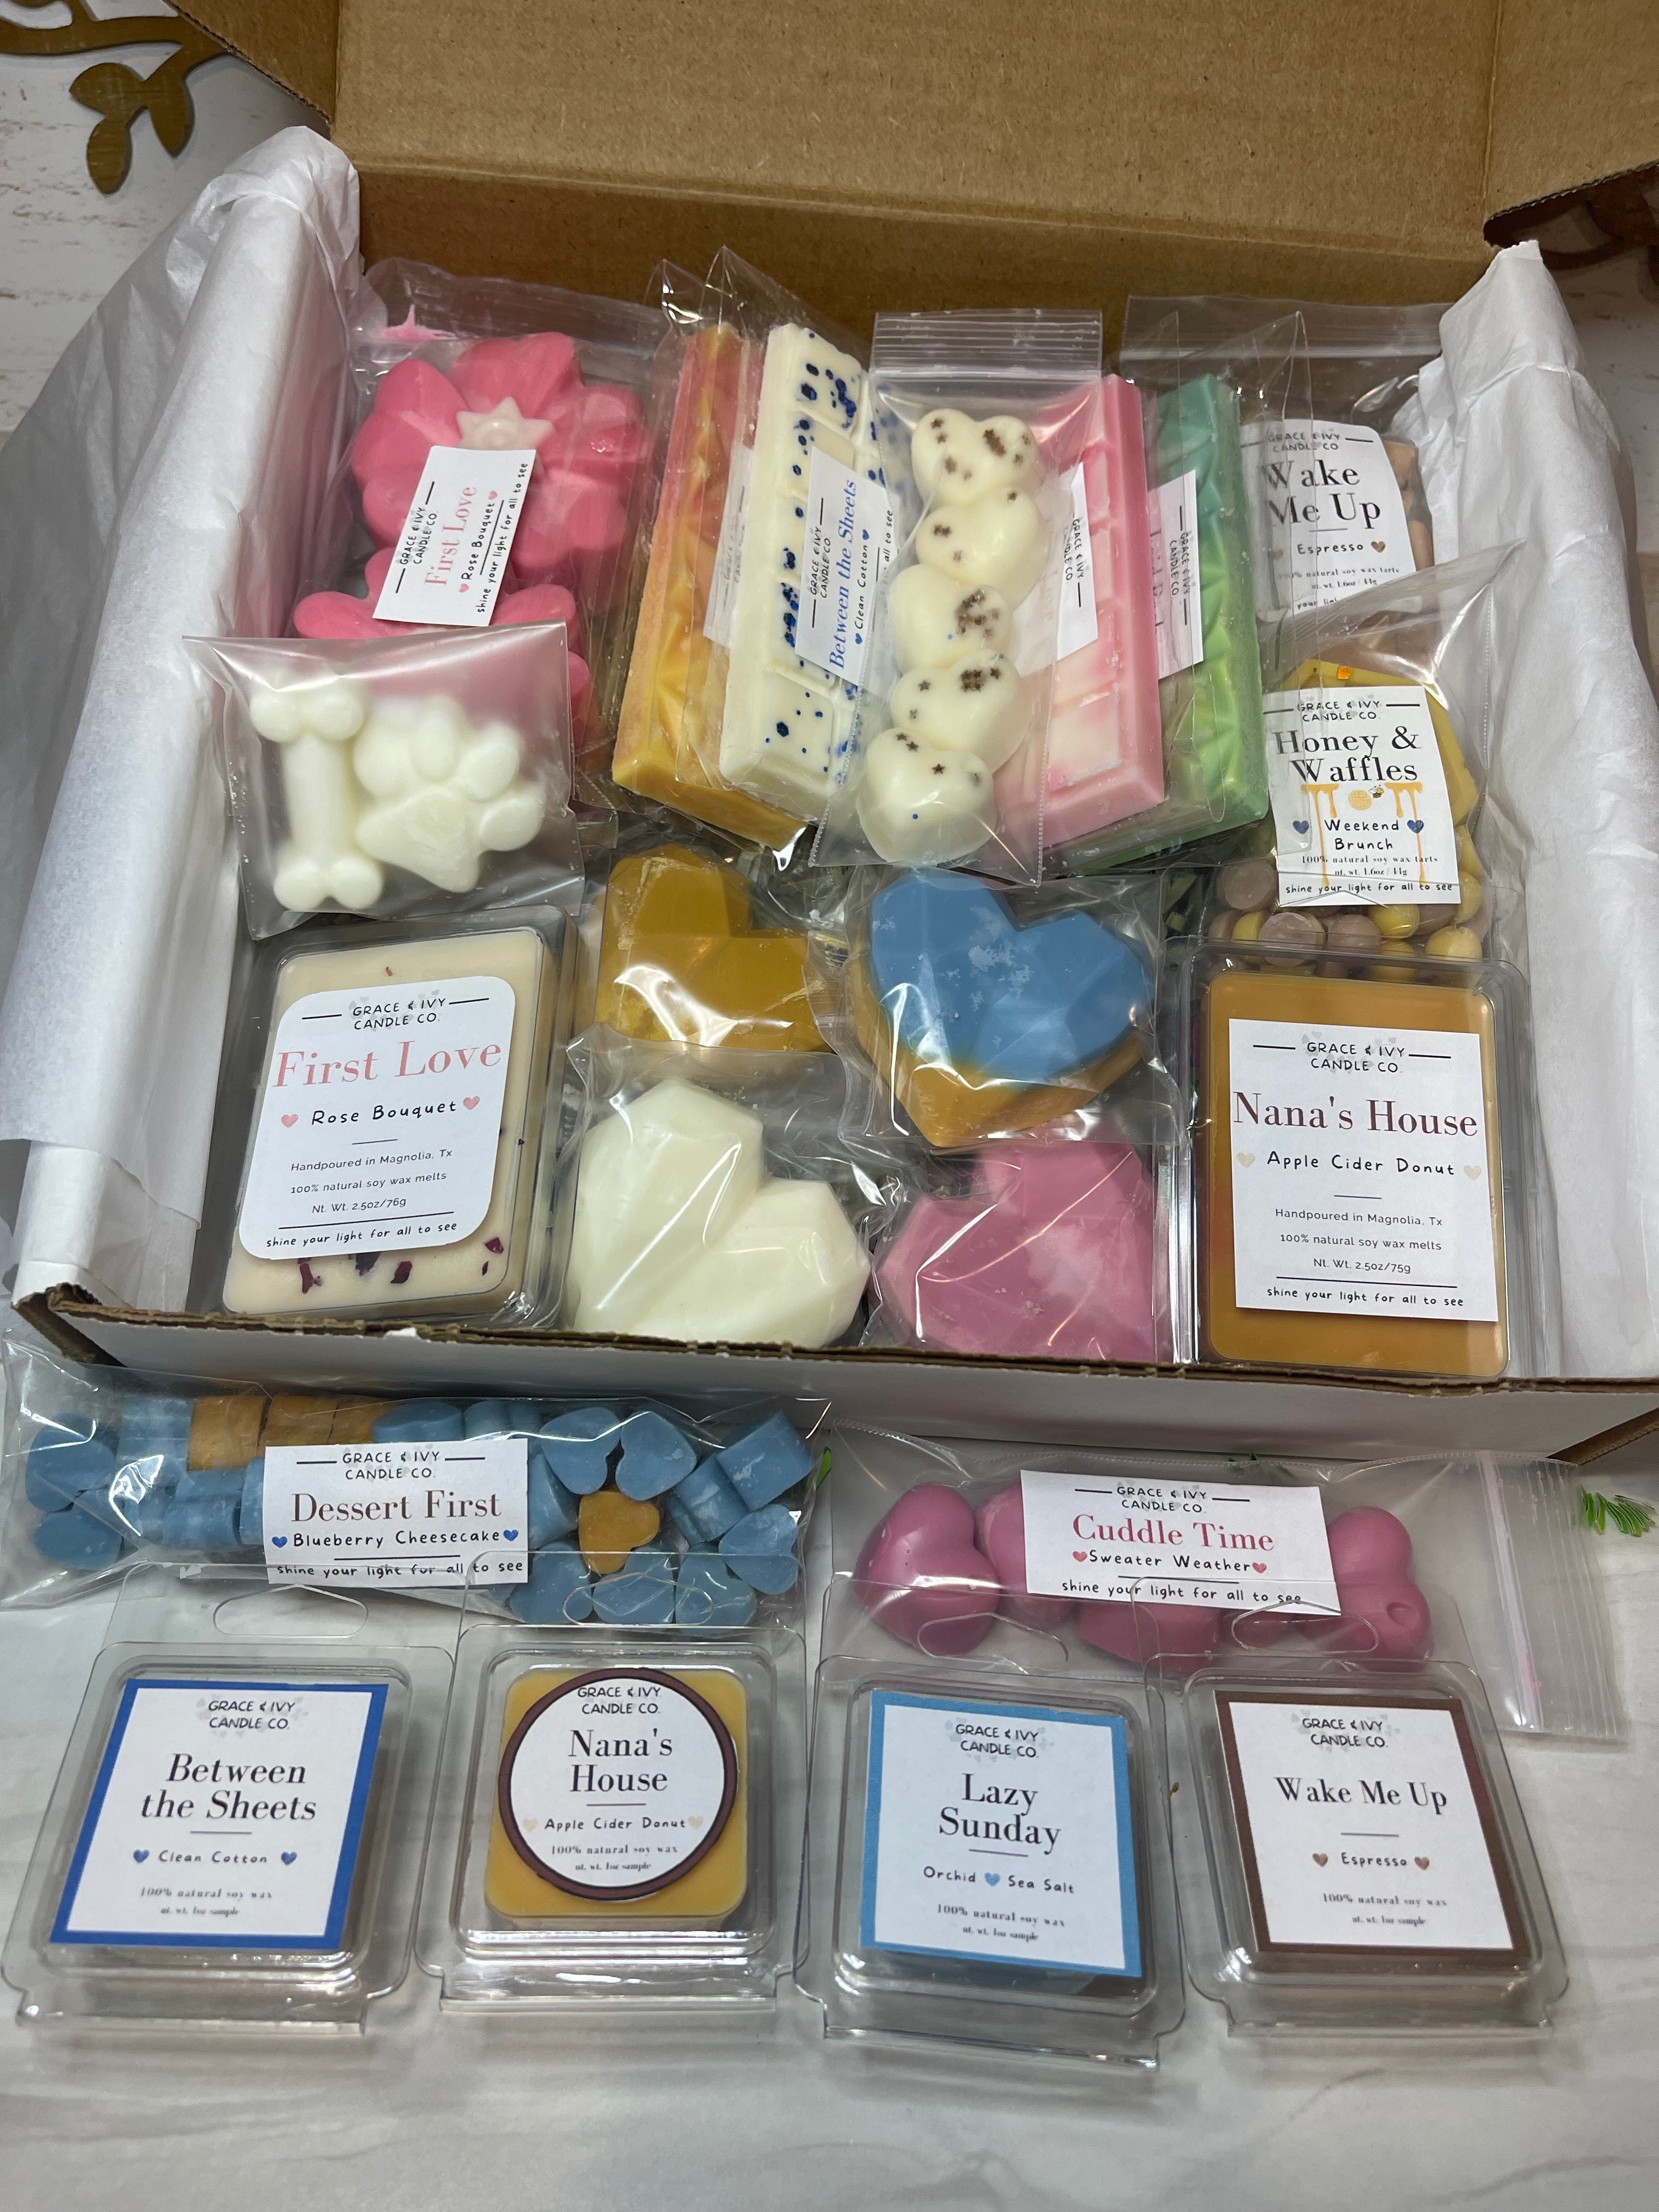 Mystery Sampler Box of wax melts - Large